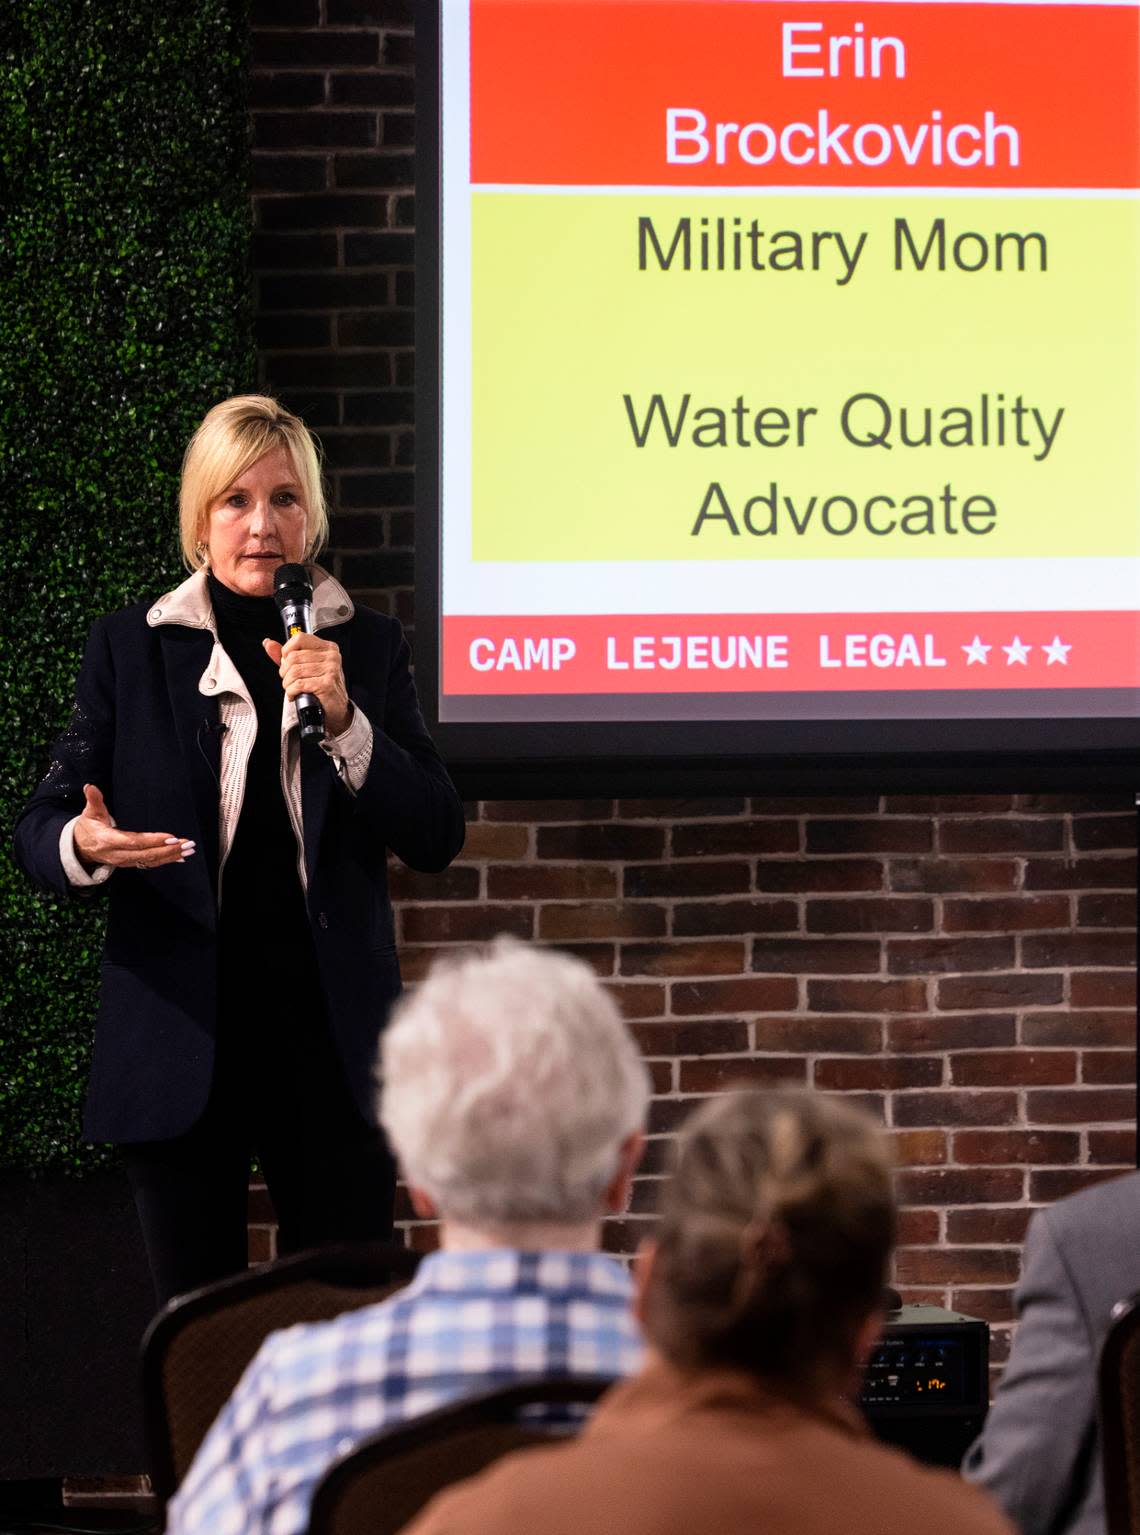 Erin Brockovich (left) joined other advocates with Camp LeJeune Legal for the first in a series of town halls in cities across America in Raleigh, Nov. 4, 2022.